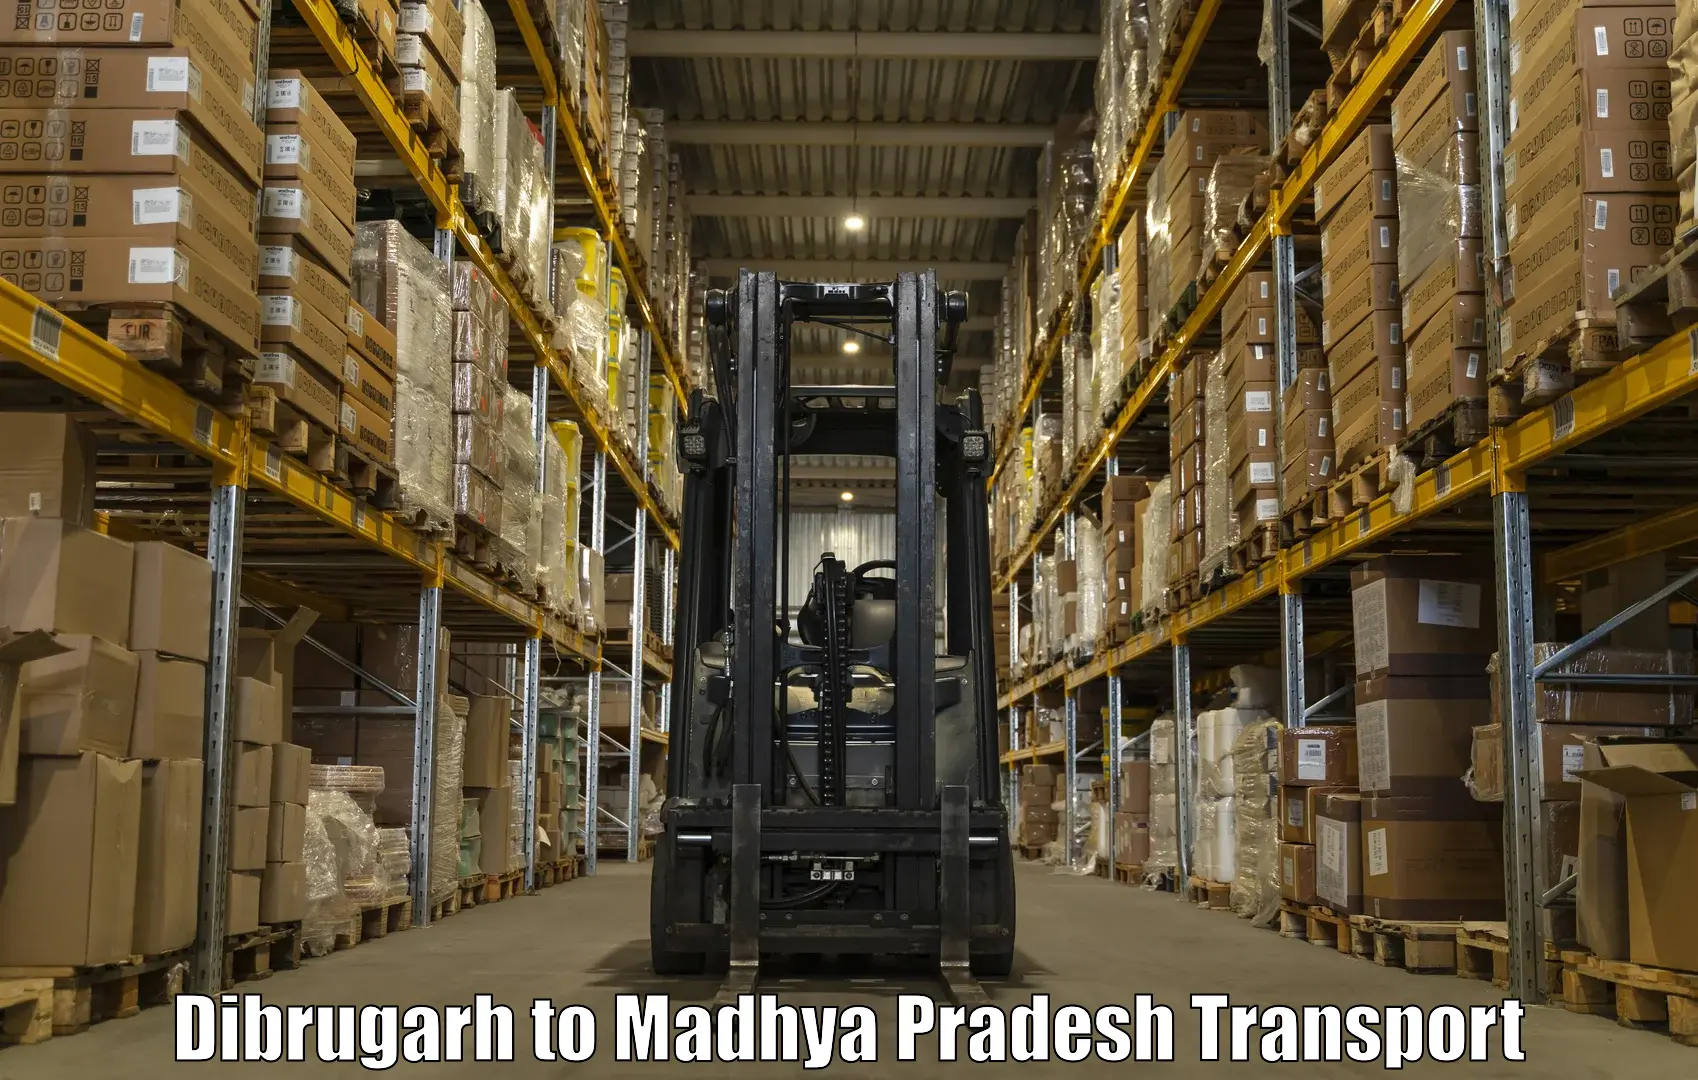 Luggage transport services Dibrugarh to Gwalior